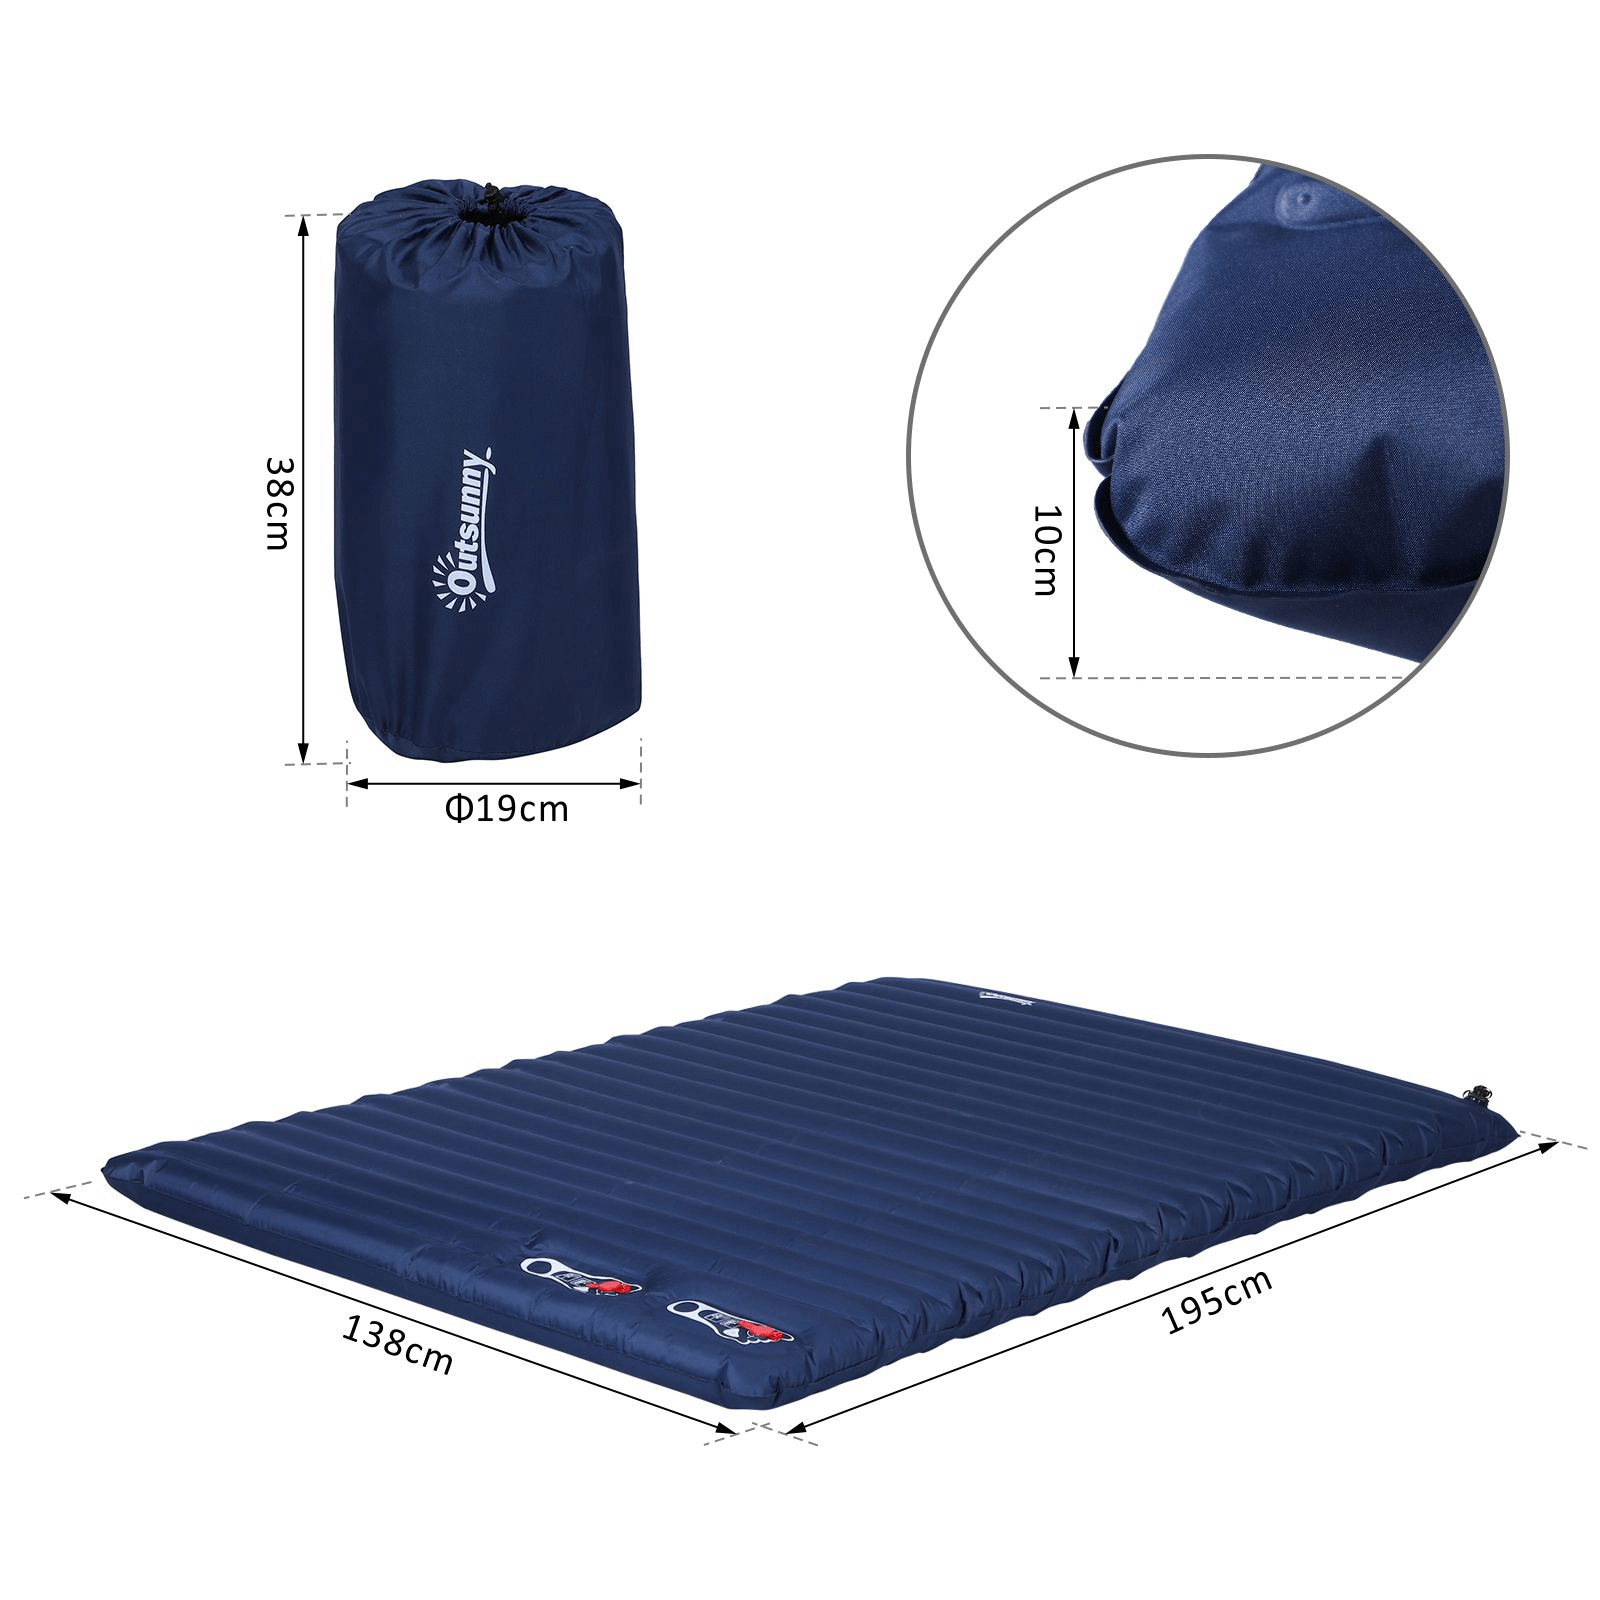 Outsunny 2 Person Camping Inflating Sleeping Mat Sleeping Mats and Airbeds Cosy Camping Co.   